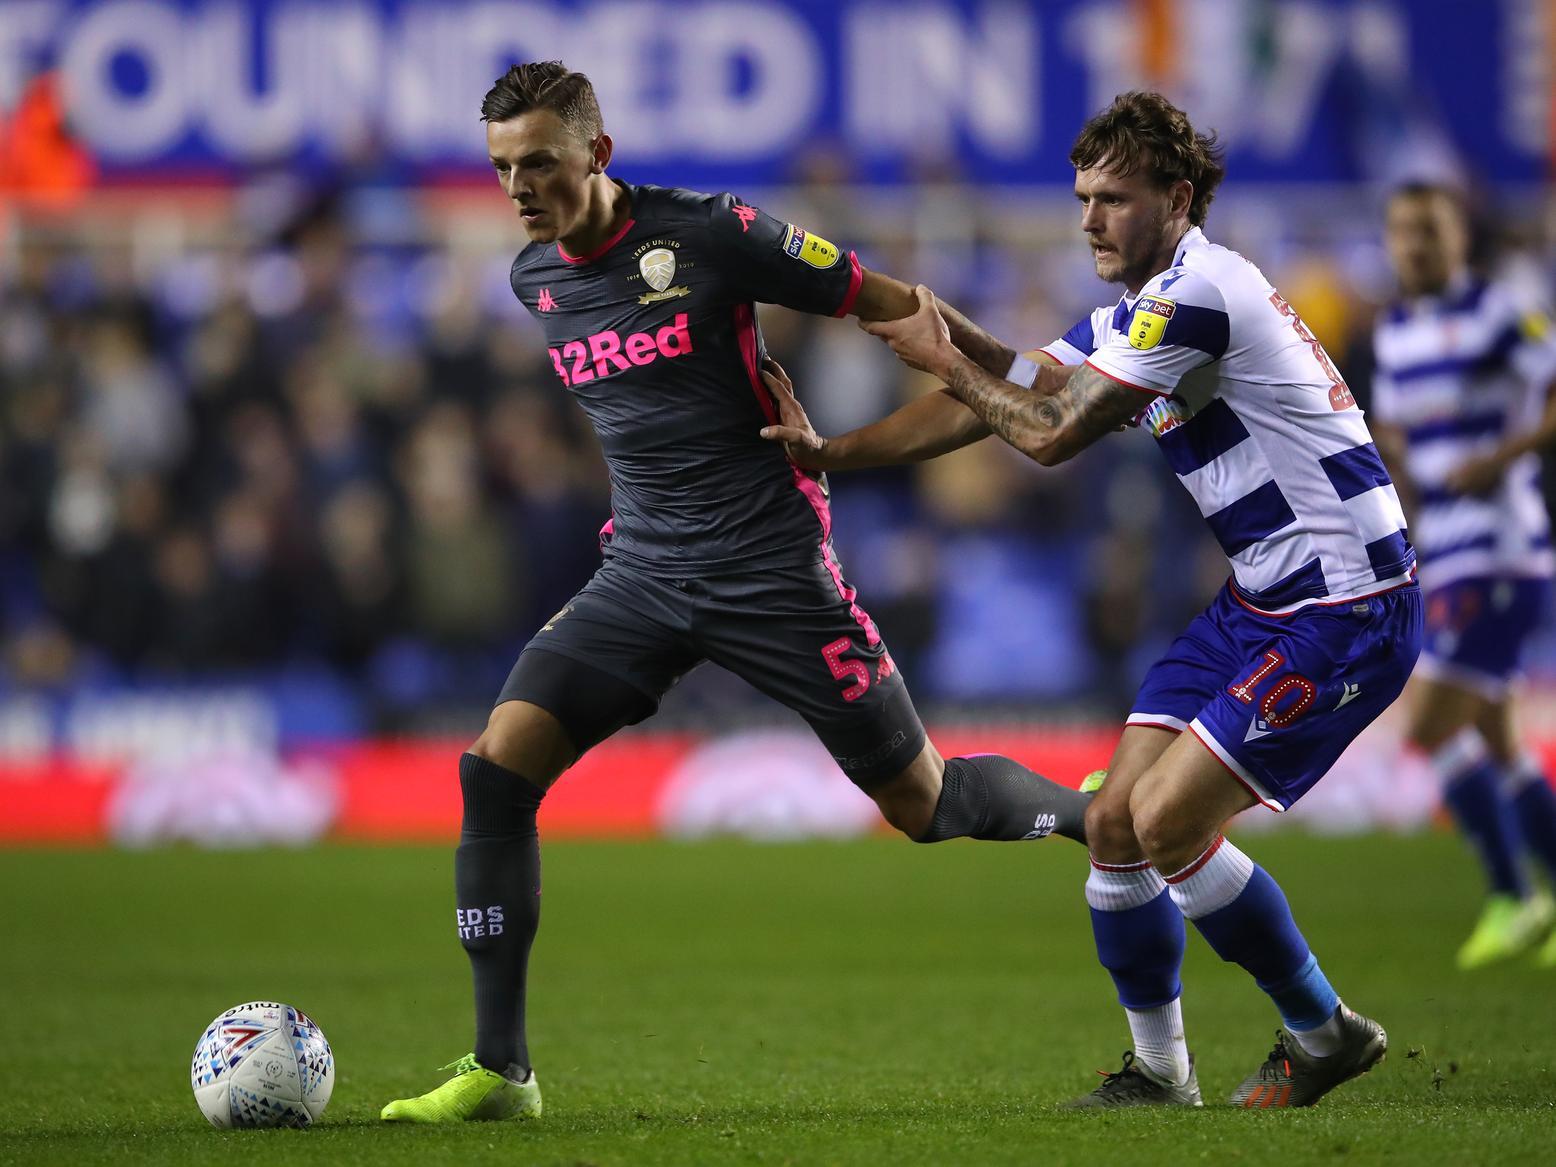 Newcastle United are said to be readying a summer move for Leeds United loanee Ben White, who has excelled in the second tier since joining on loan from Brighton. (Chronicle)